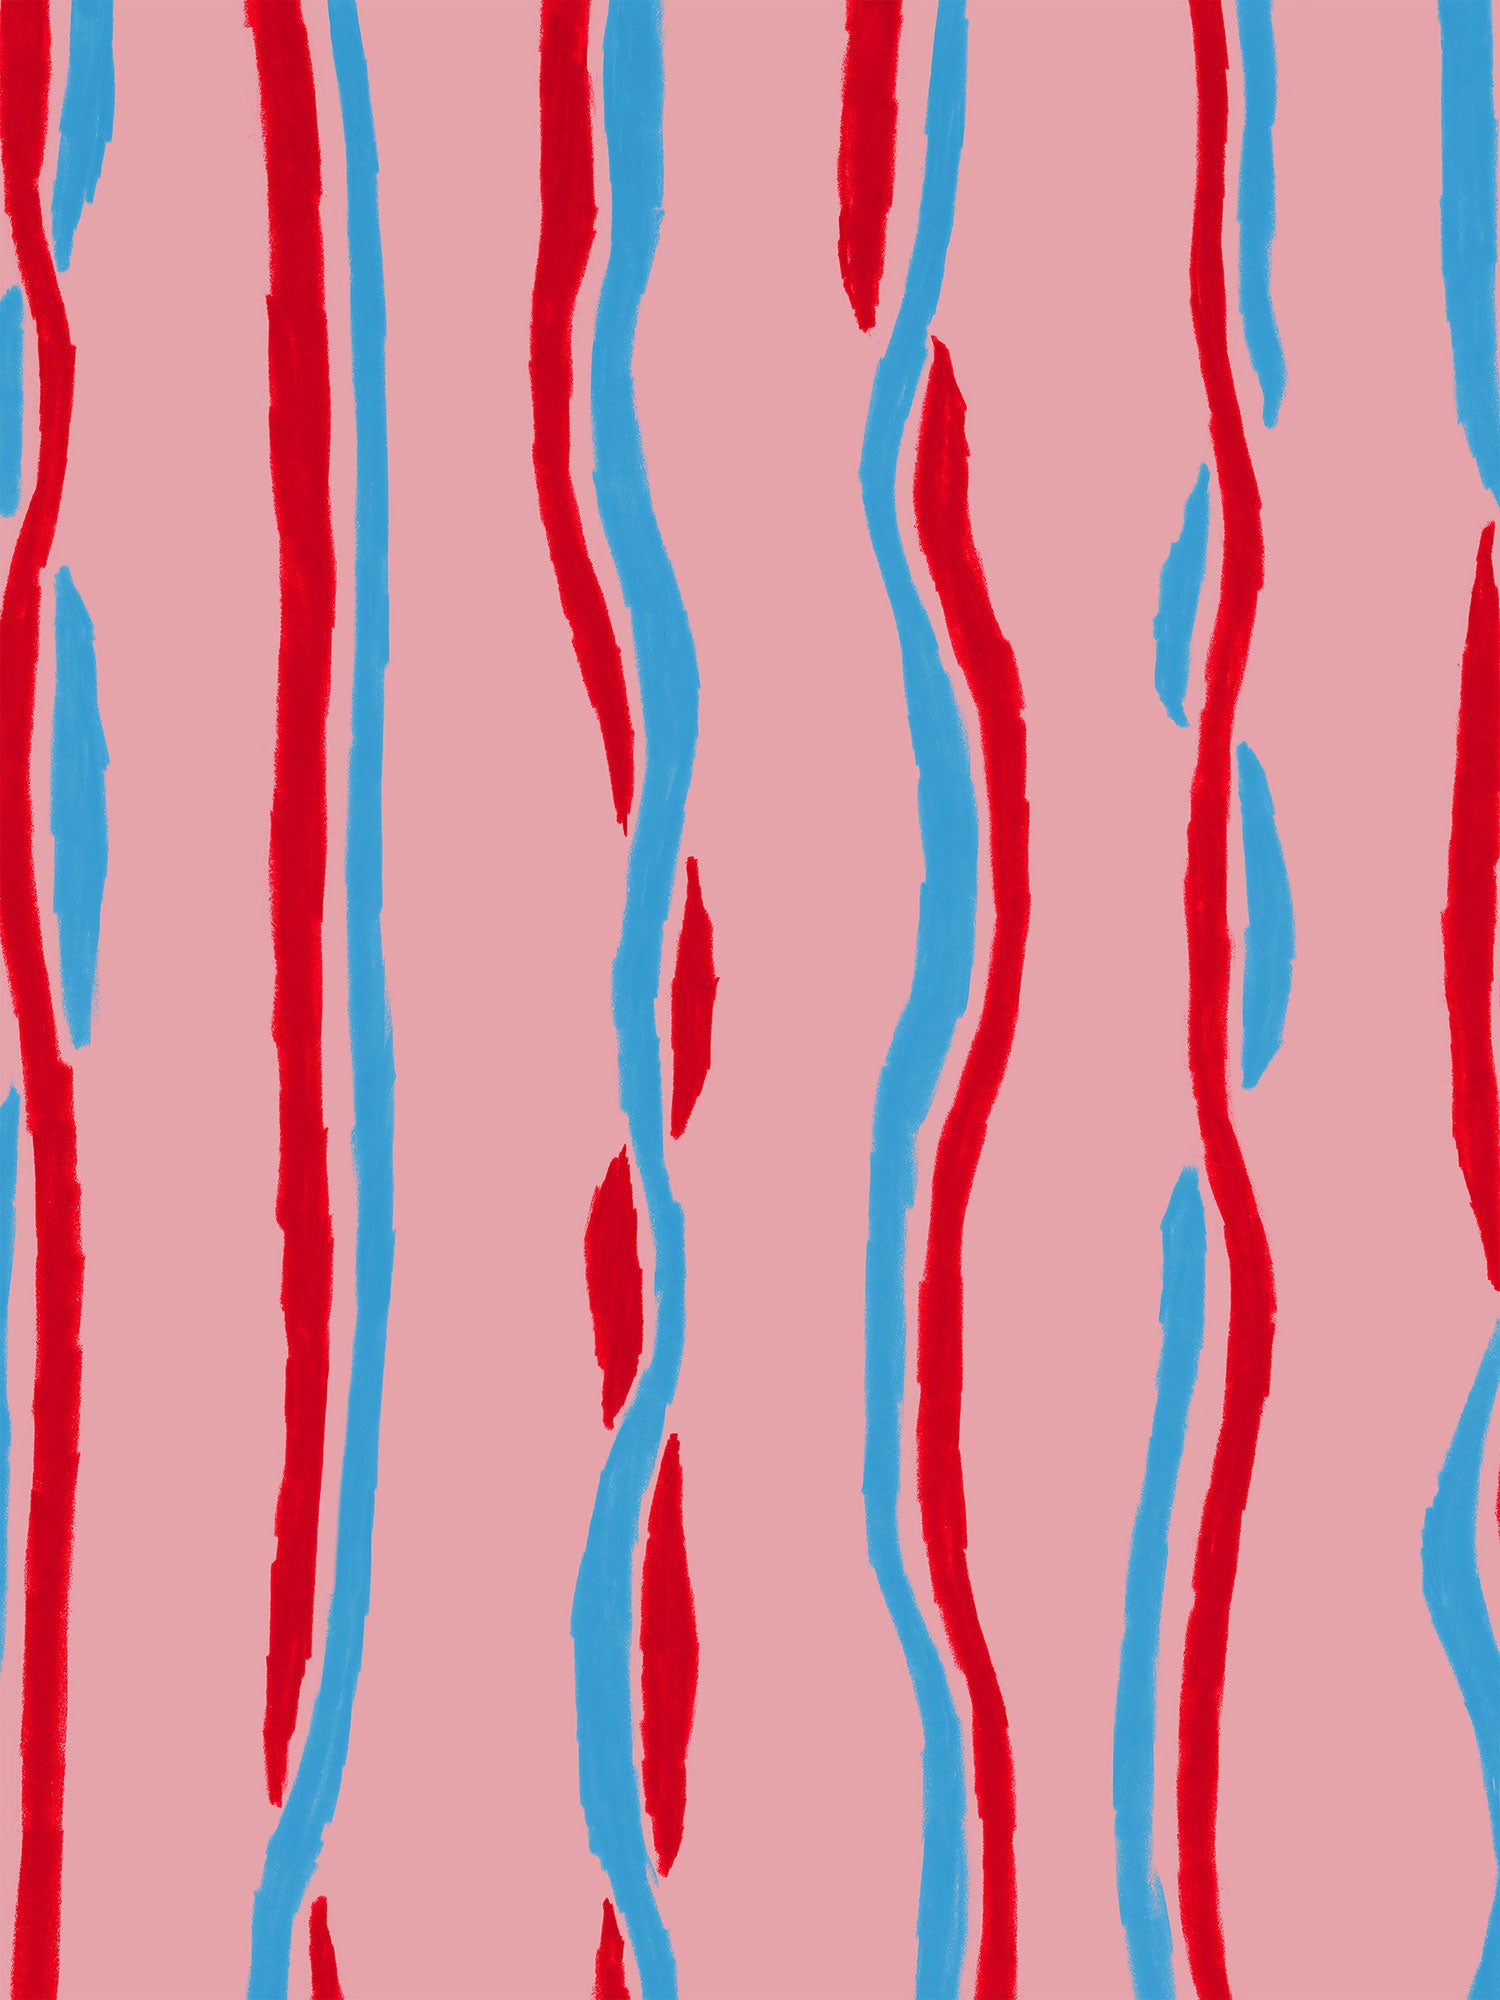 Pink wallpaper with vertical ribbons stripes in blue and red